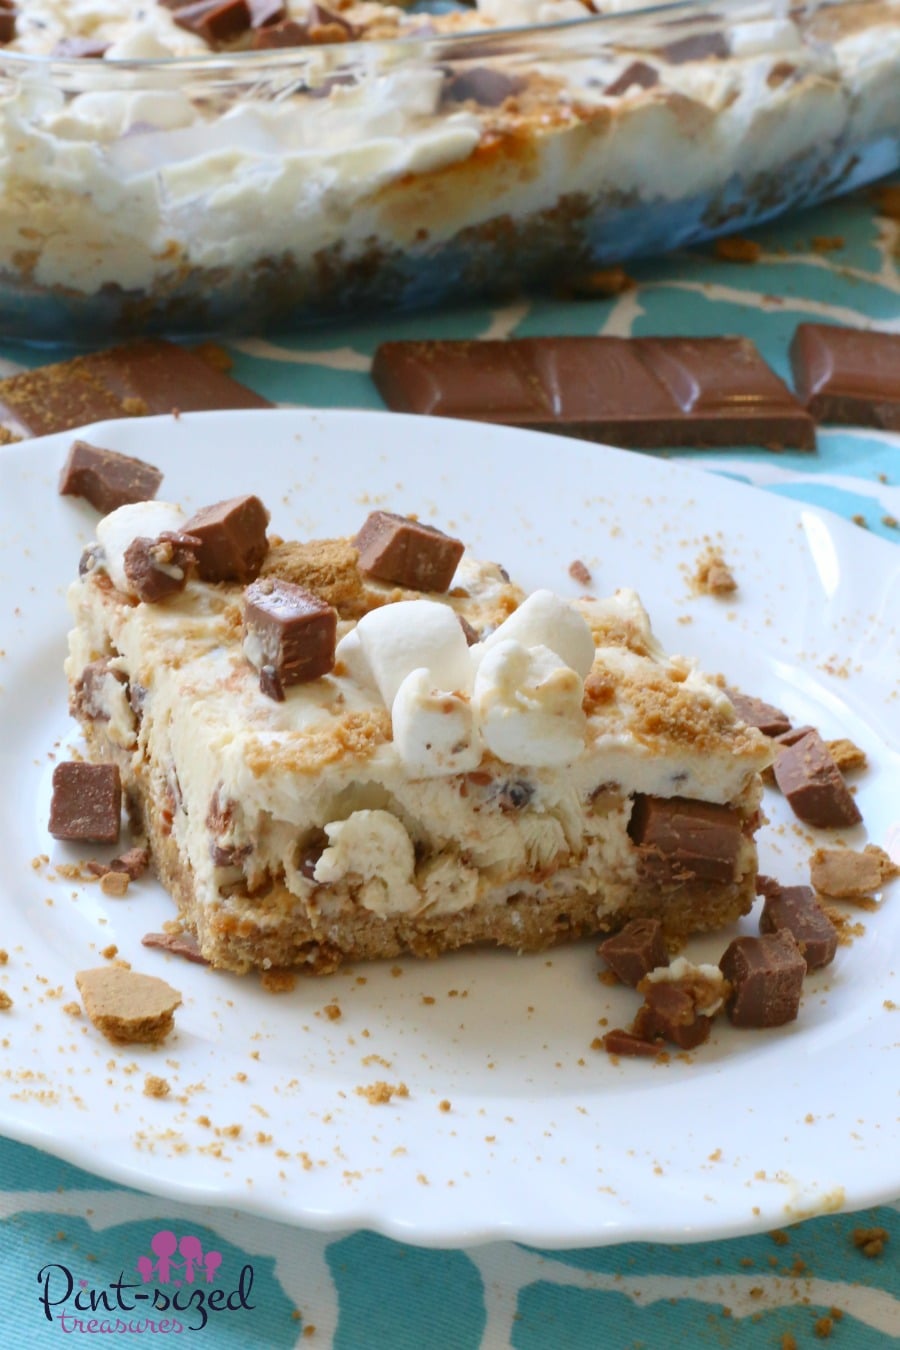 Calling all s'mores fans! Dig into these frozen yogurt s'mores bars for a super-fun twist on traditional s'mores that will be a crowd-pleaser!